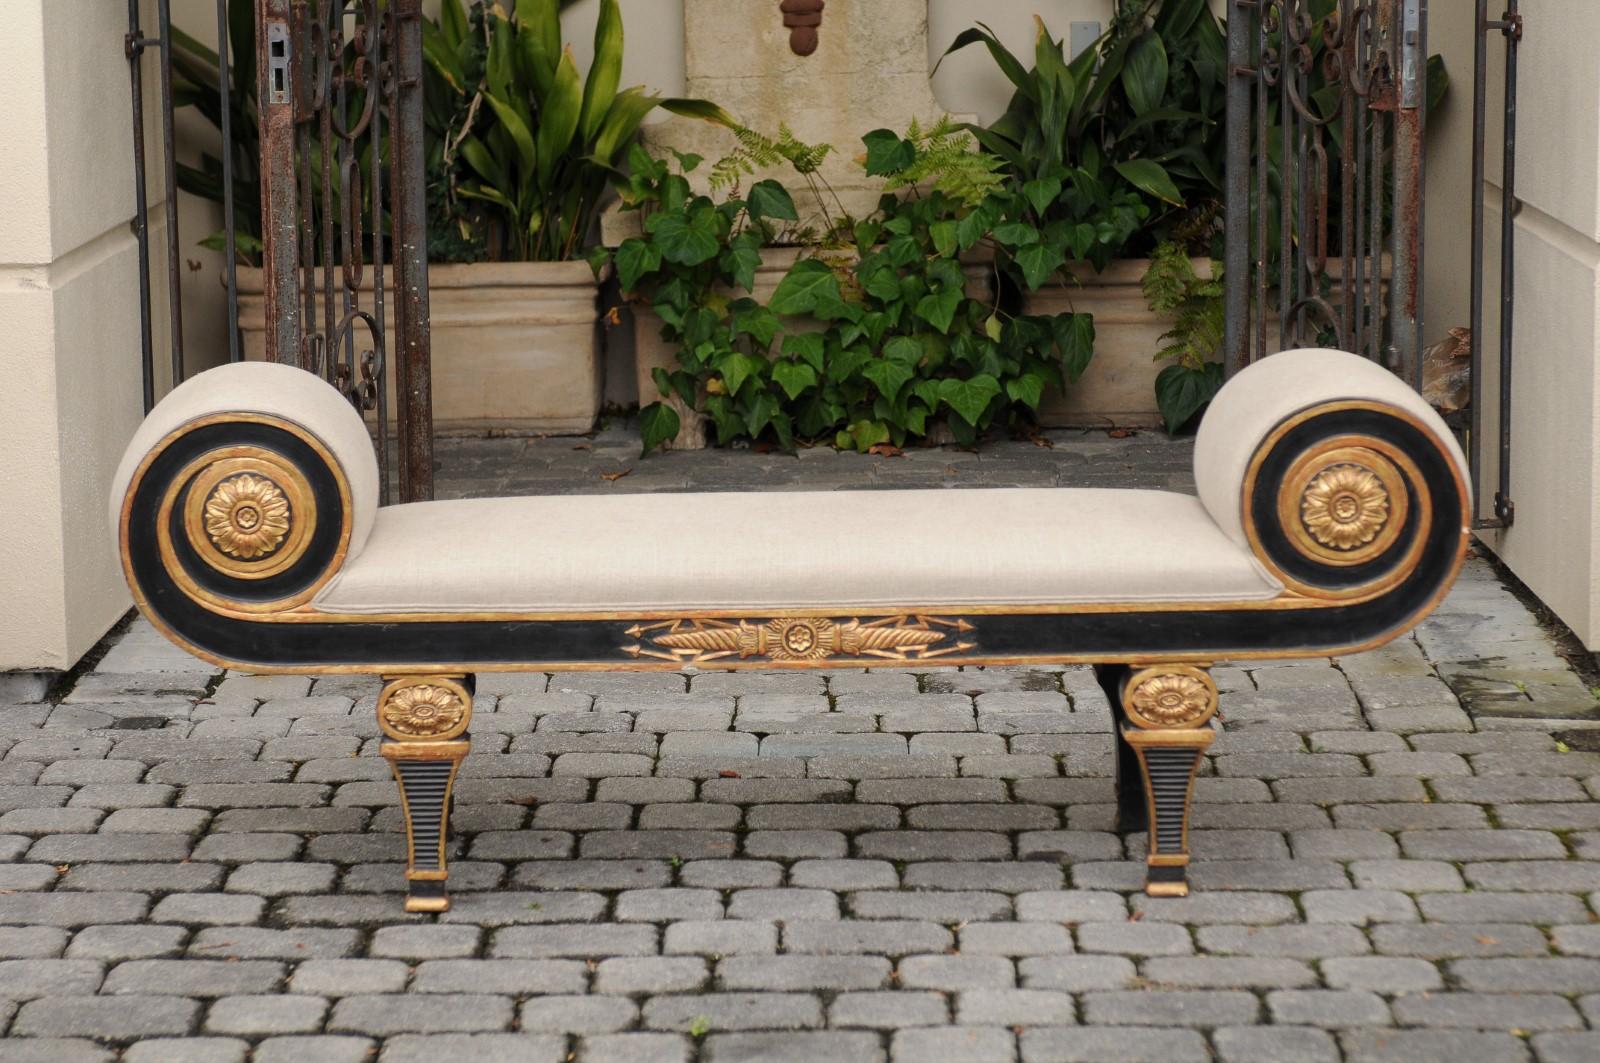 A French Napoleon III style ebonized wood bench from the early 20th century, with scrolled supports, gilded accents and new upholstery. This French bench features an exquisite ebonized silhouette, adorned with eye-catching scrolling supports, each